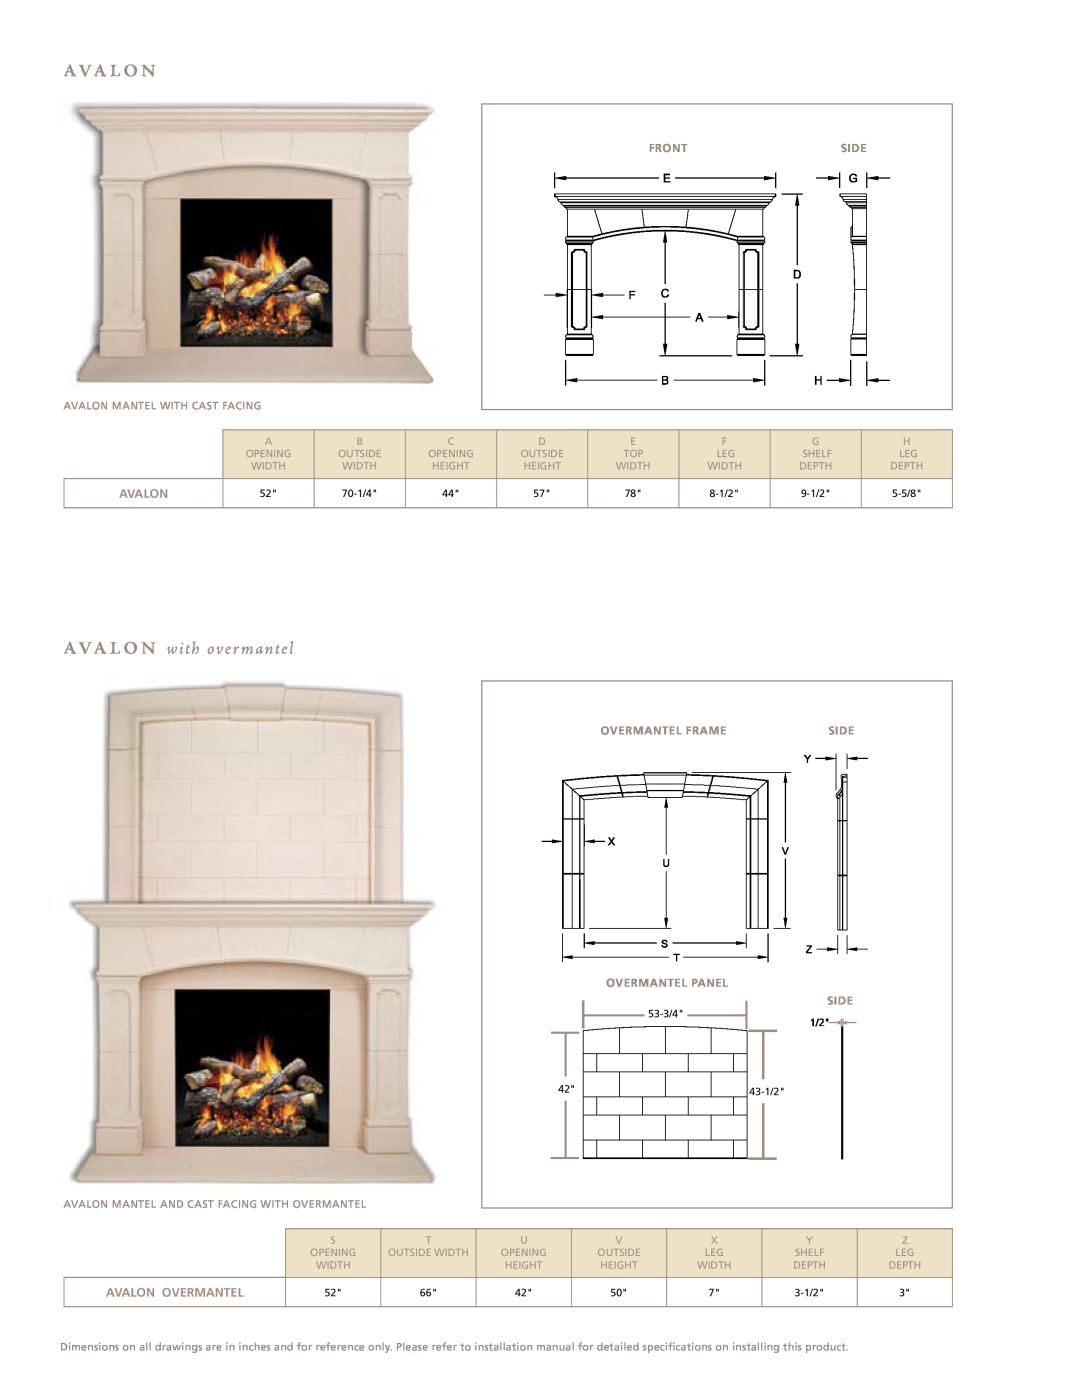 Hearth and Home Technologies Cast Mantels manual Ava l o n w ith ove r mantel, Frontside, Mantel & Stone, avalon, Side 